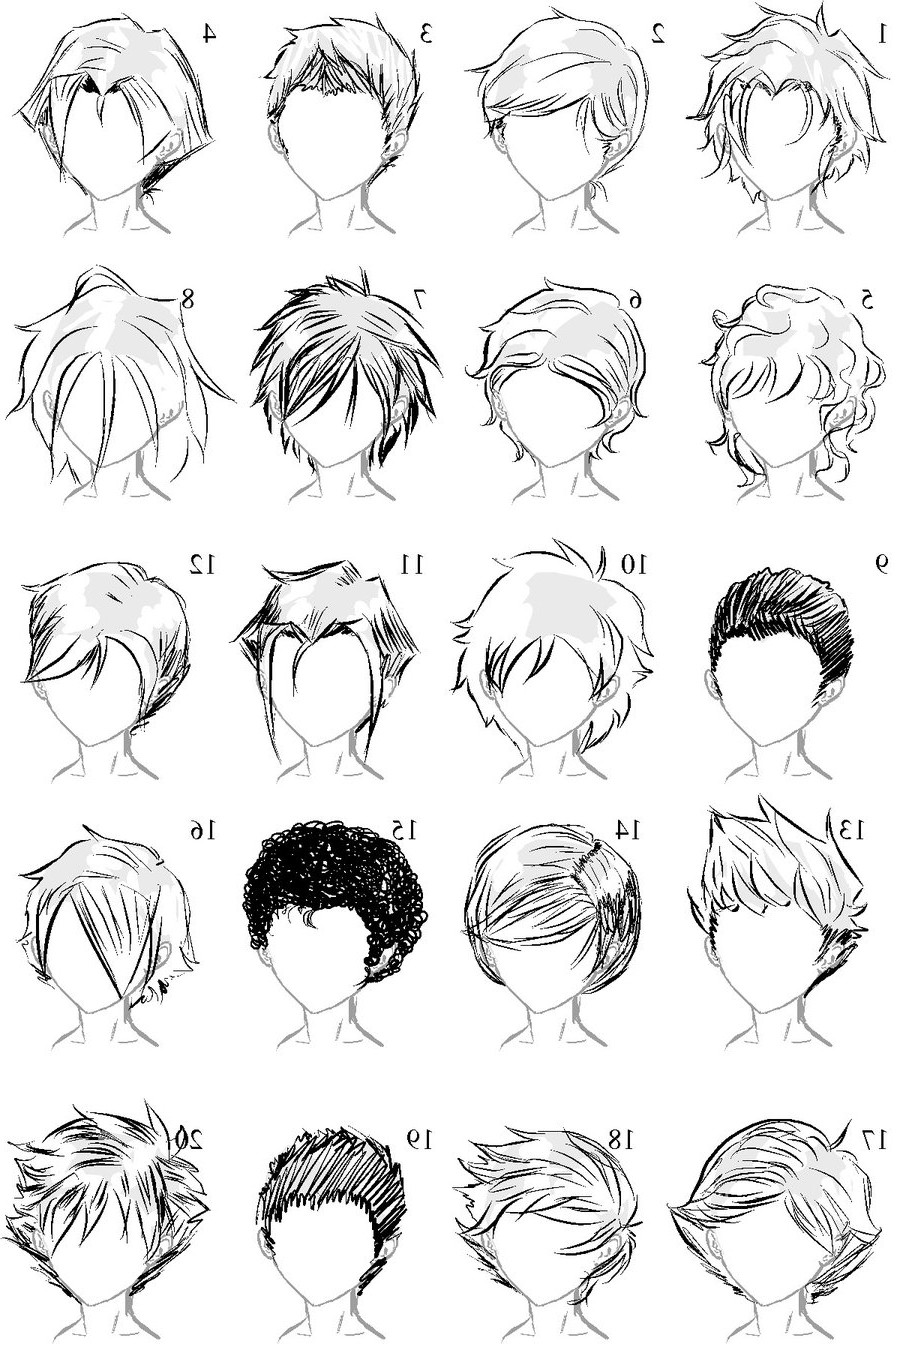 Anime Guy Hairstyles Drawing
 Male Anime Hairstyles Drawing at PaintingValley